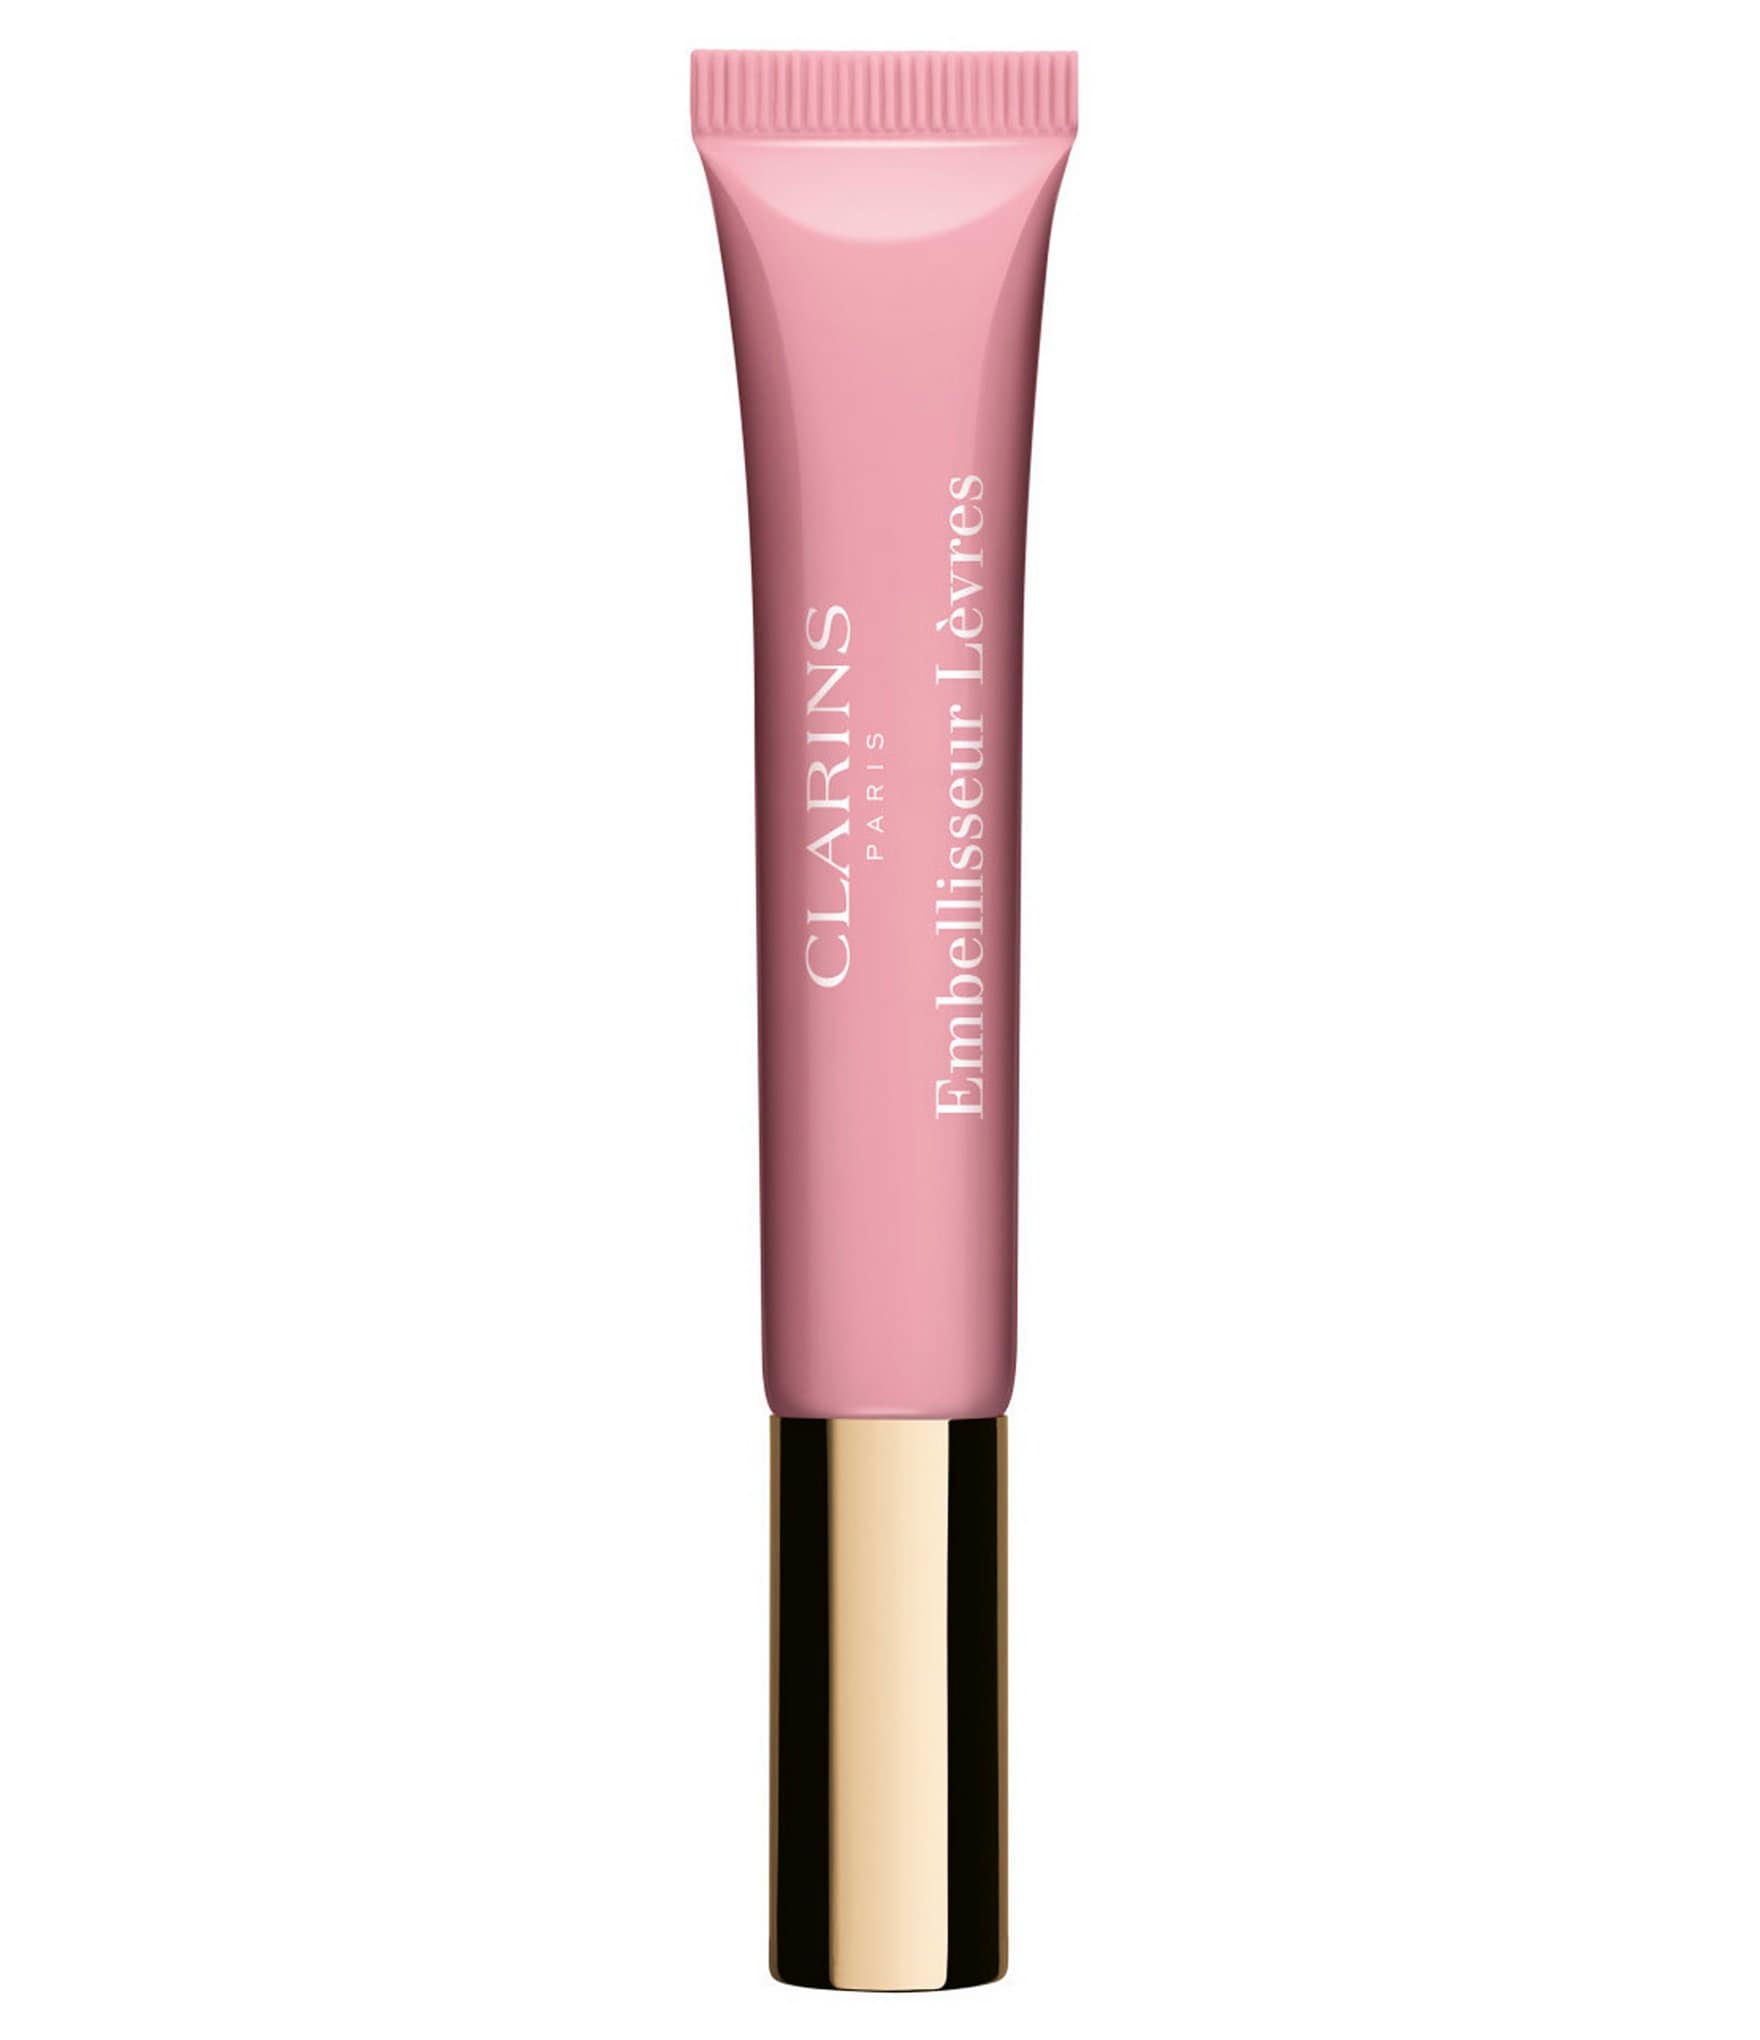 New Clarins Instant Light Natural Lip Perfector